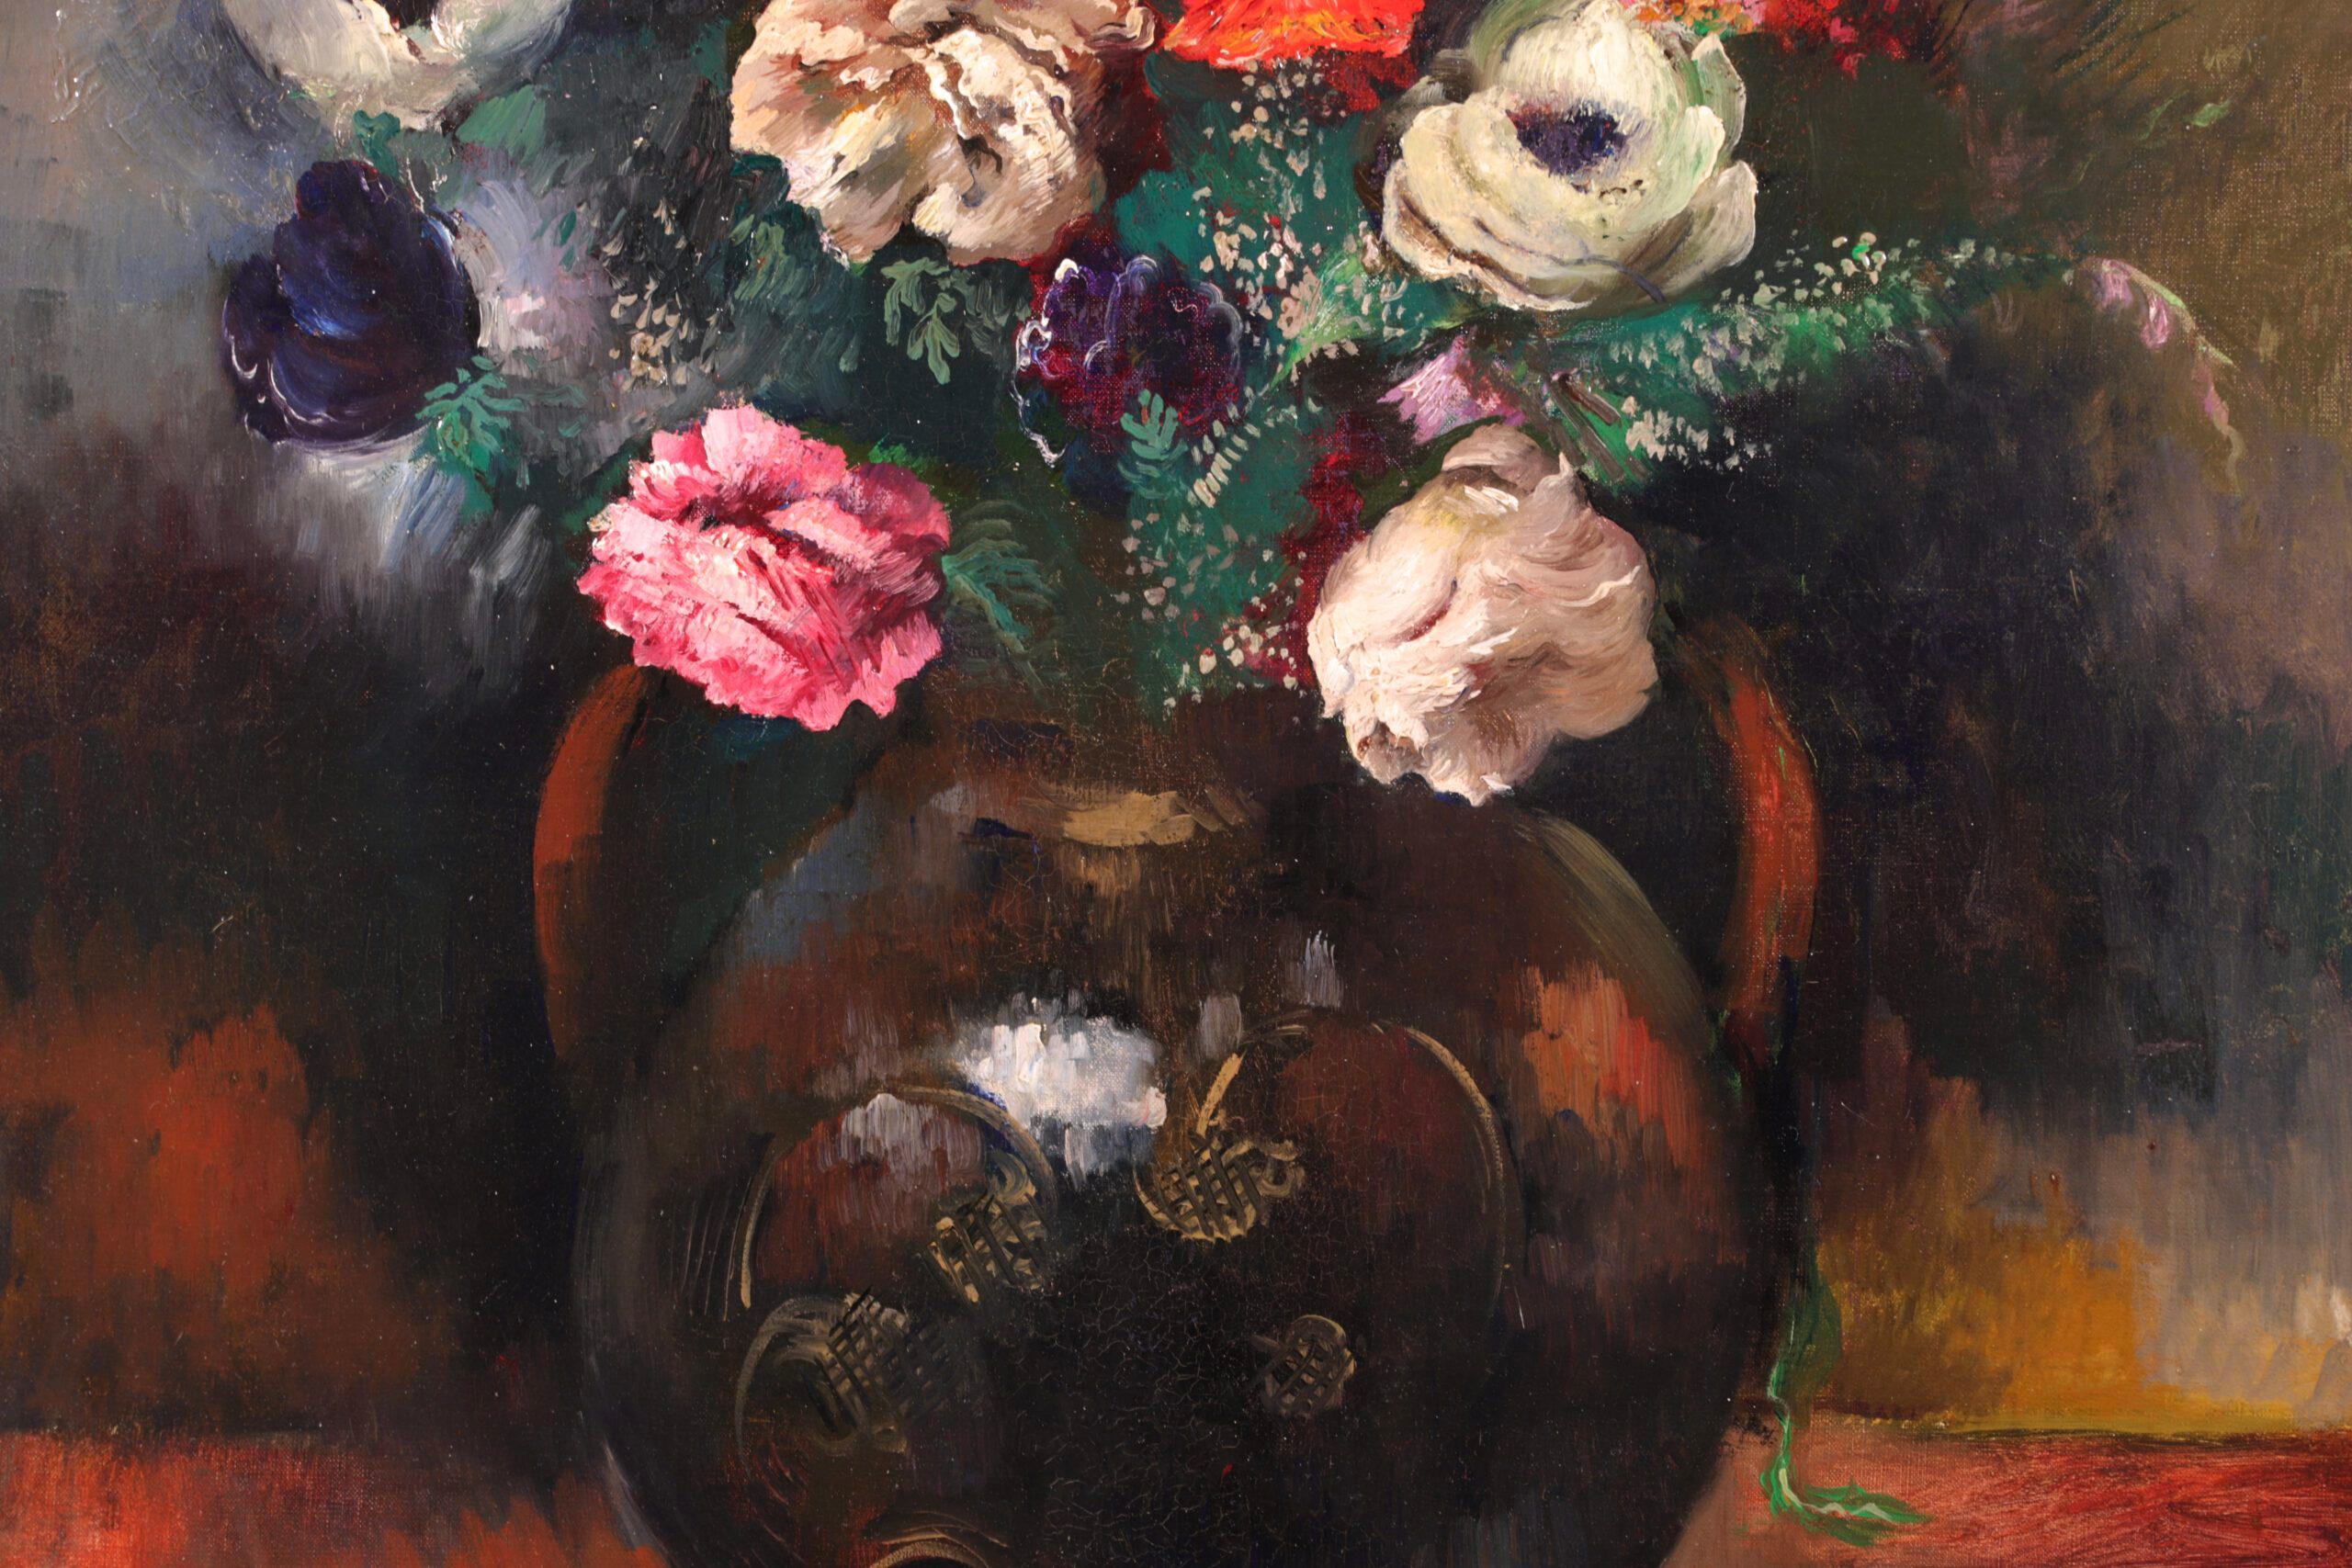 Signed and dated post impressionist still life oil on canvas by French painter Paul Elie Gernez. The piece depicts a brown ceramic vase filled with several varieties of flowers in pinks, reds, purples, yellows and whites. A wonderful work by this